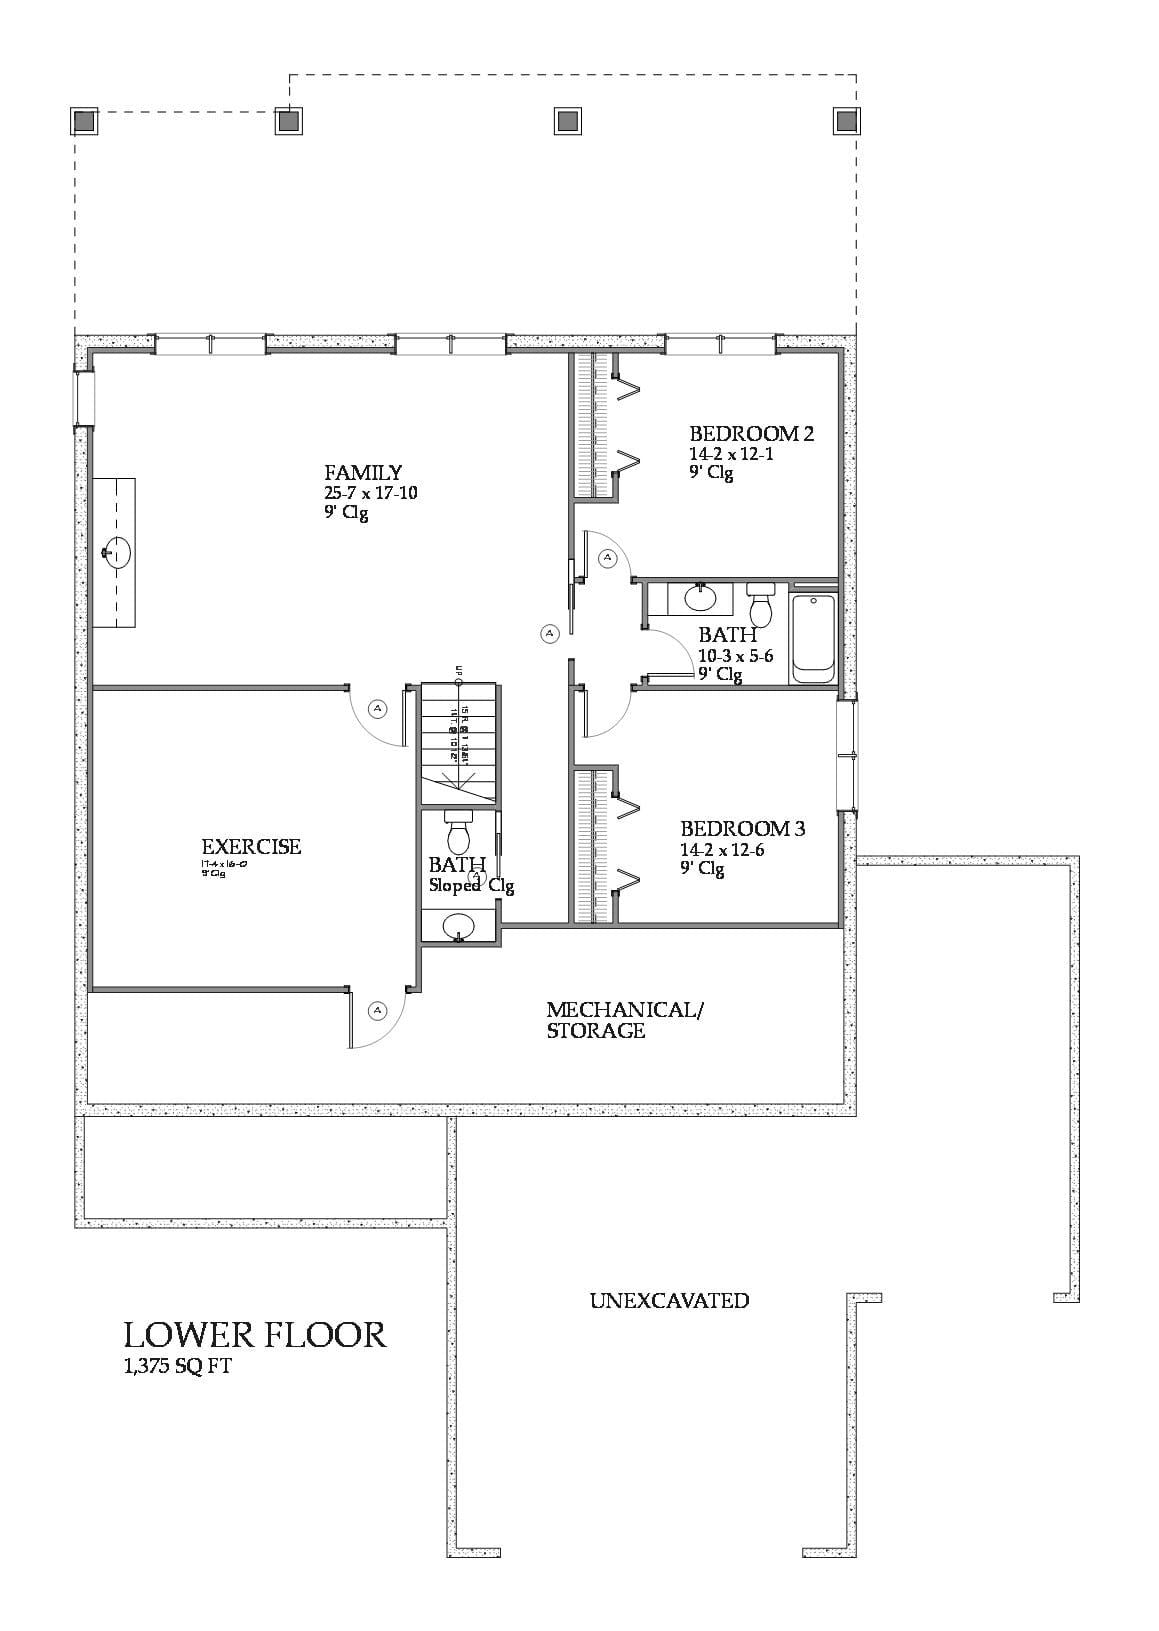 Watermark - Home Design and Floor Plan - SketchPad House Plans